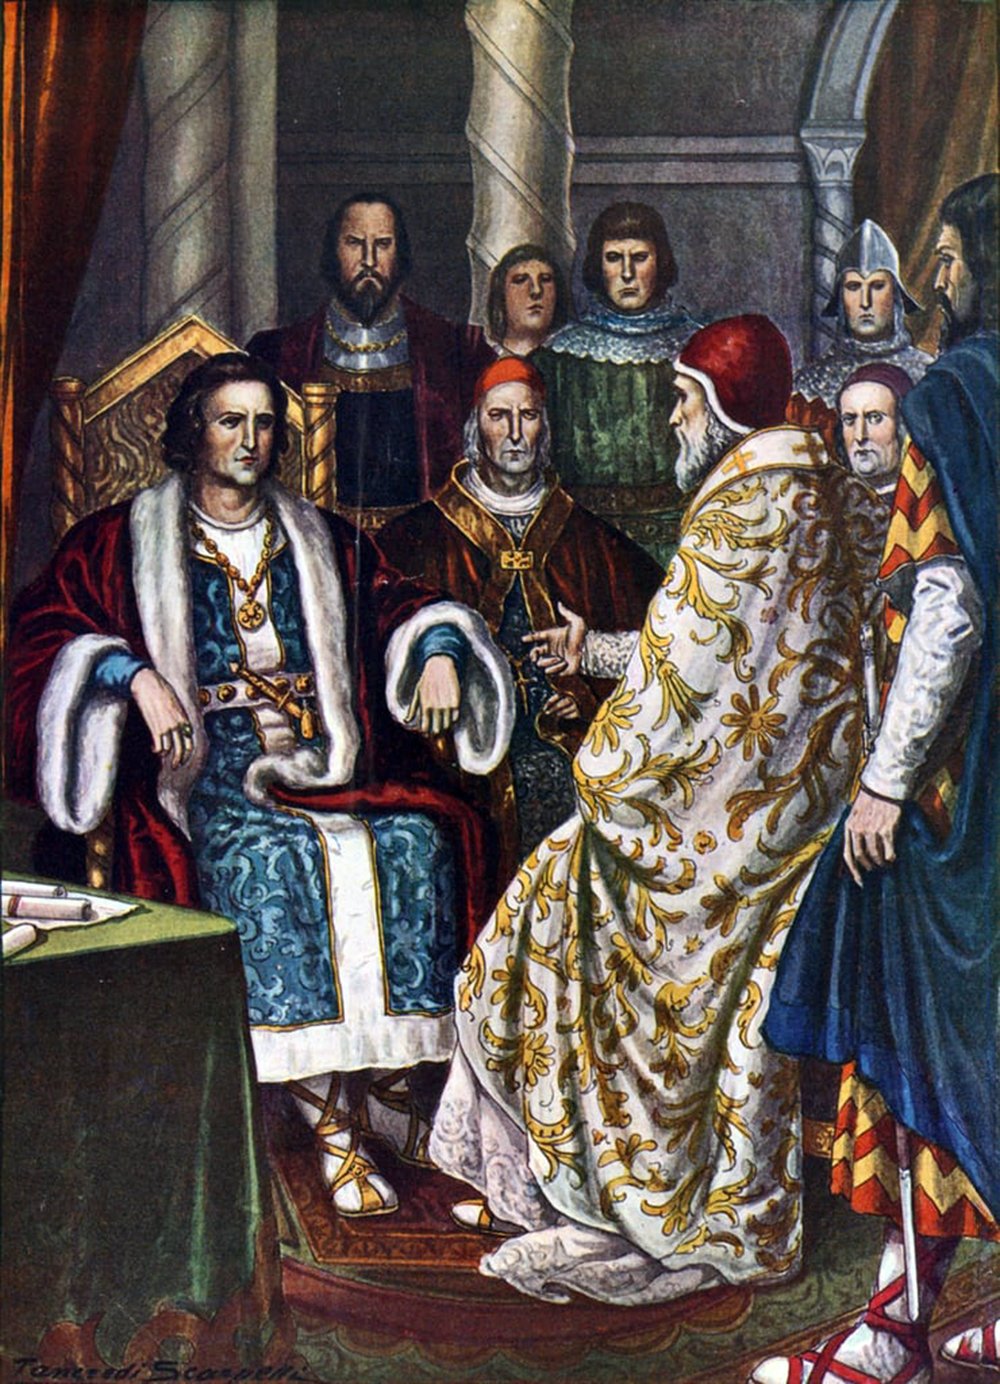 An illustration of King Pepin the Short in conversation with Pope Stephen II. The Pope and King are surrounded by nobles and knights. Every character depicted is wearing elaborate medieval clothing.